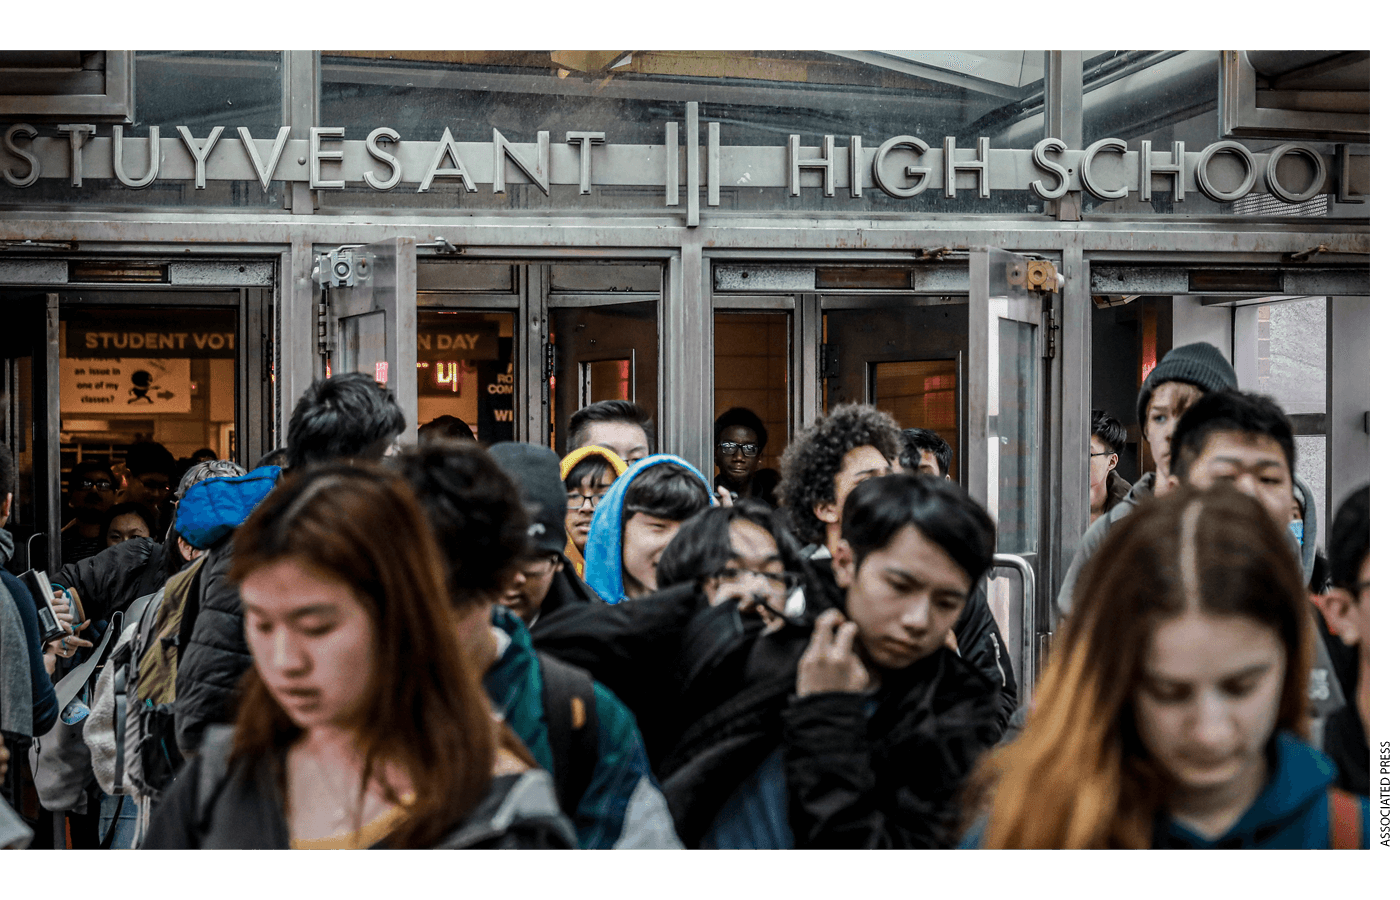 Students at Stuyvesant High School leave after classes end for the week, March 13, 2020, in New York.